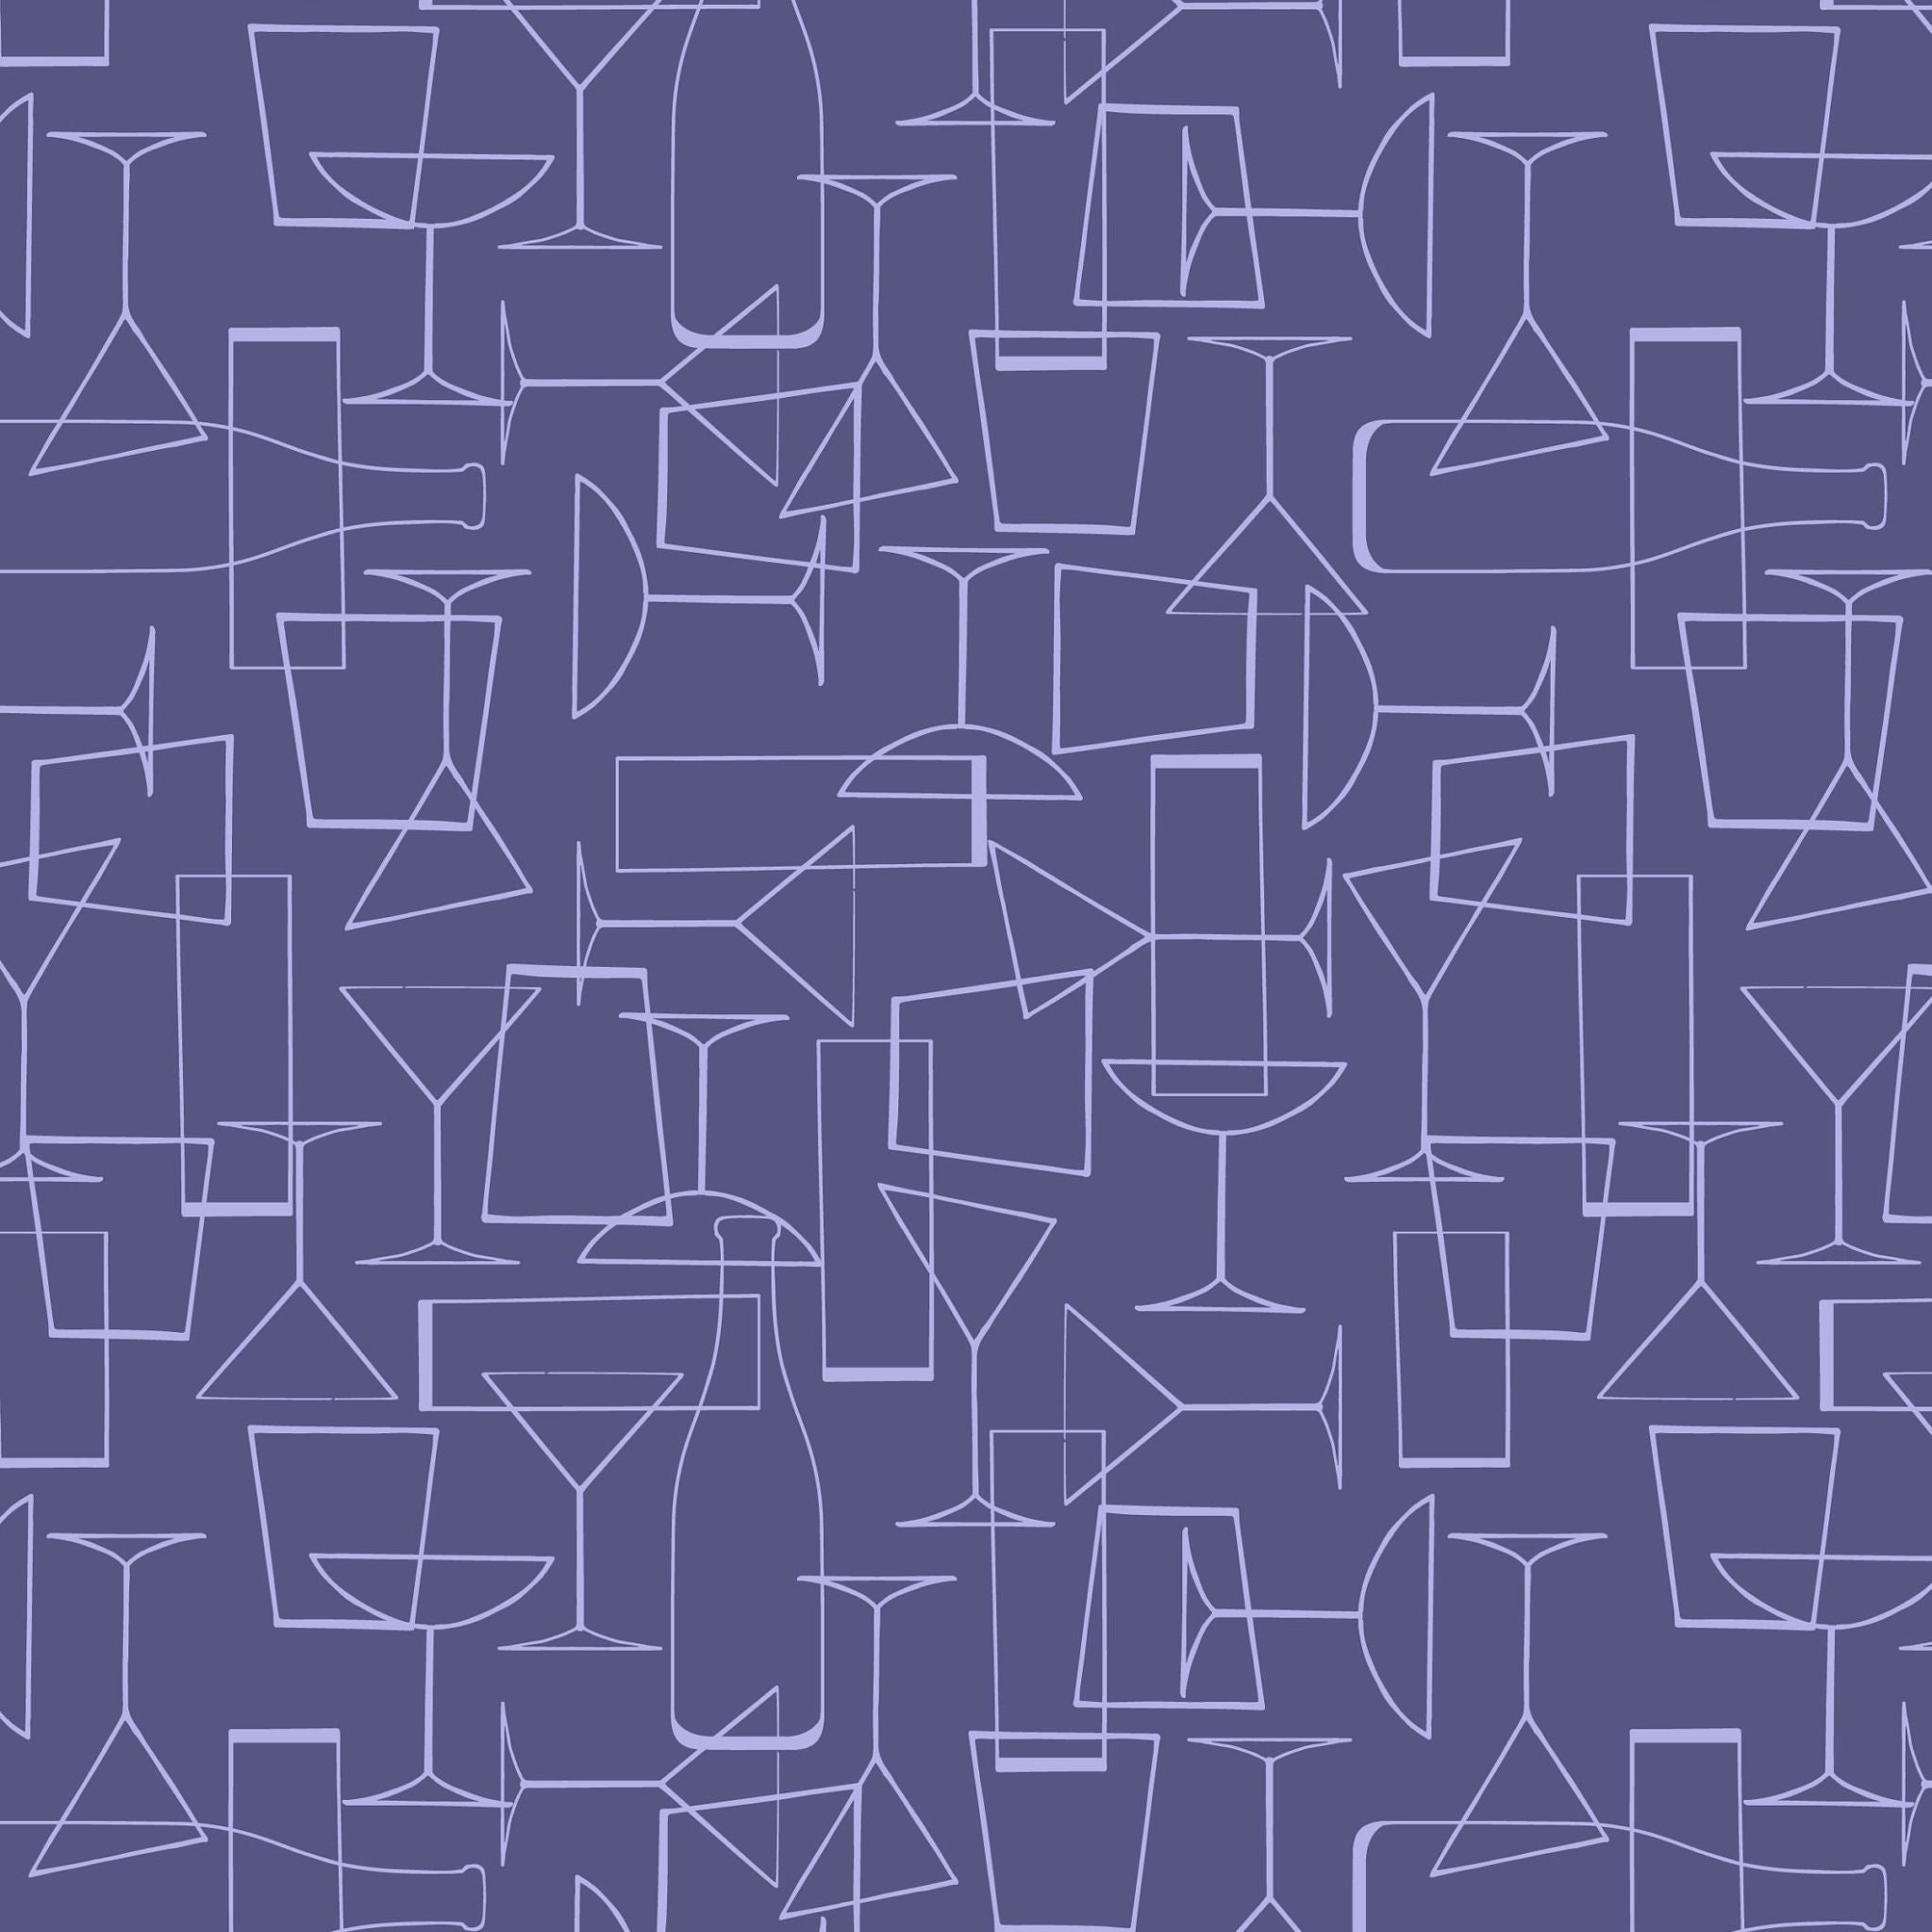 Cocktails and glasses on purple cotton fabric - Cocktail Party by Lewis and Irene